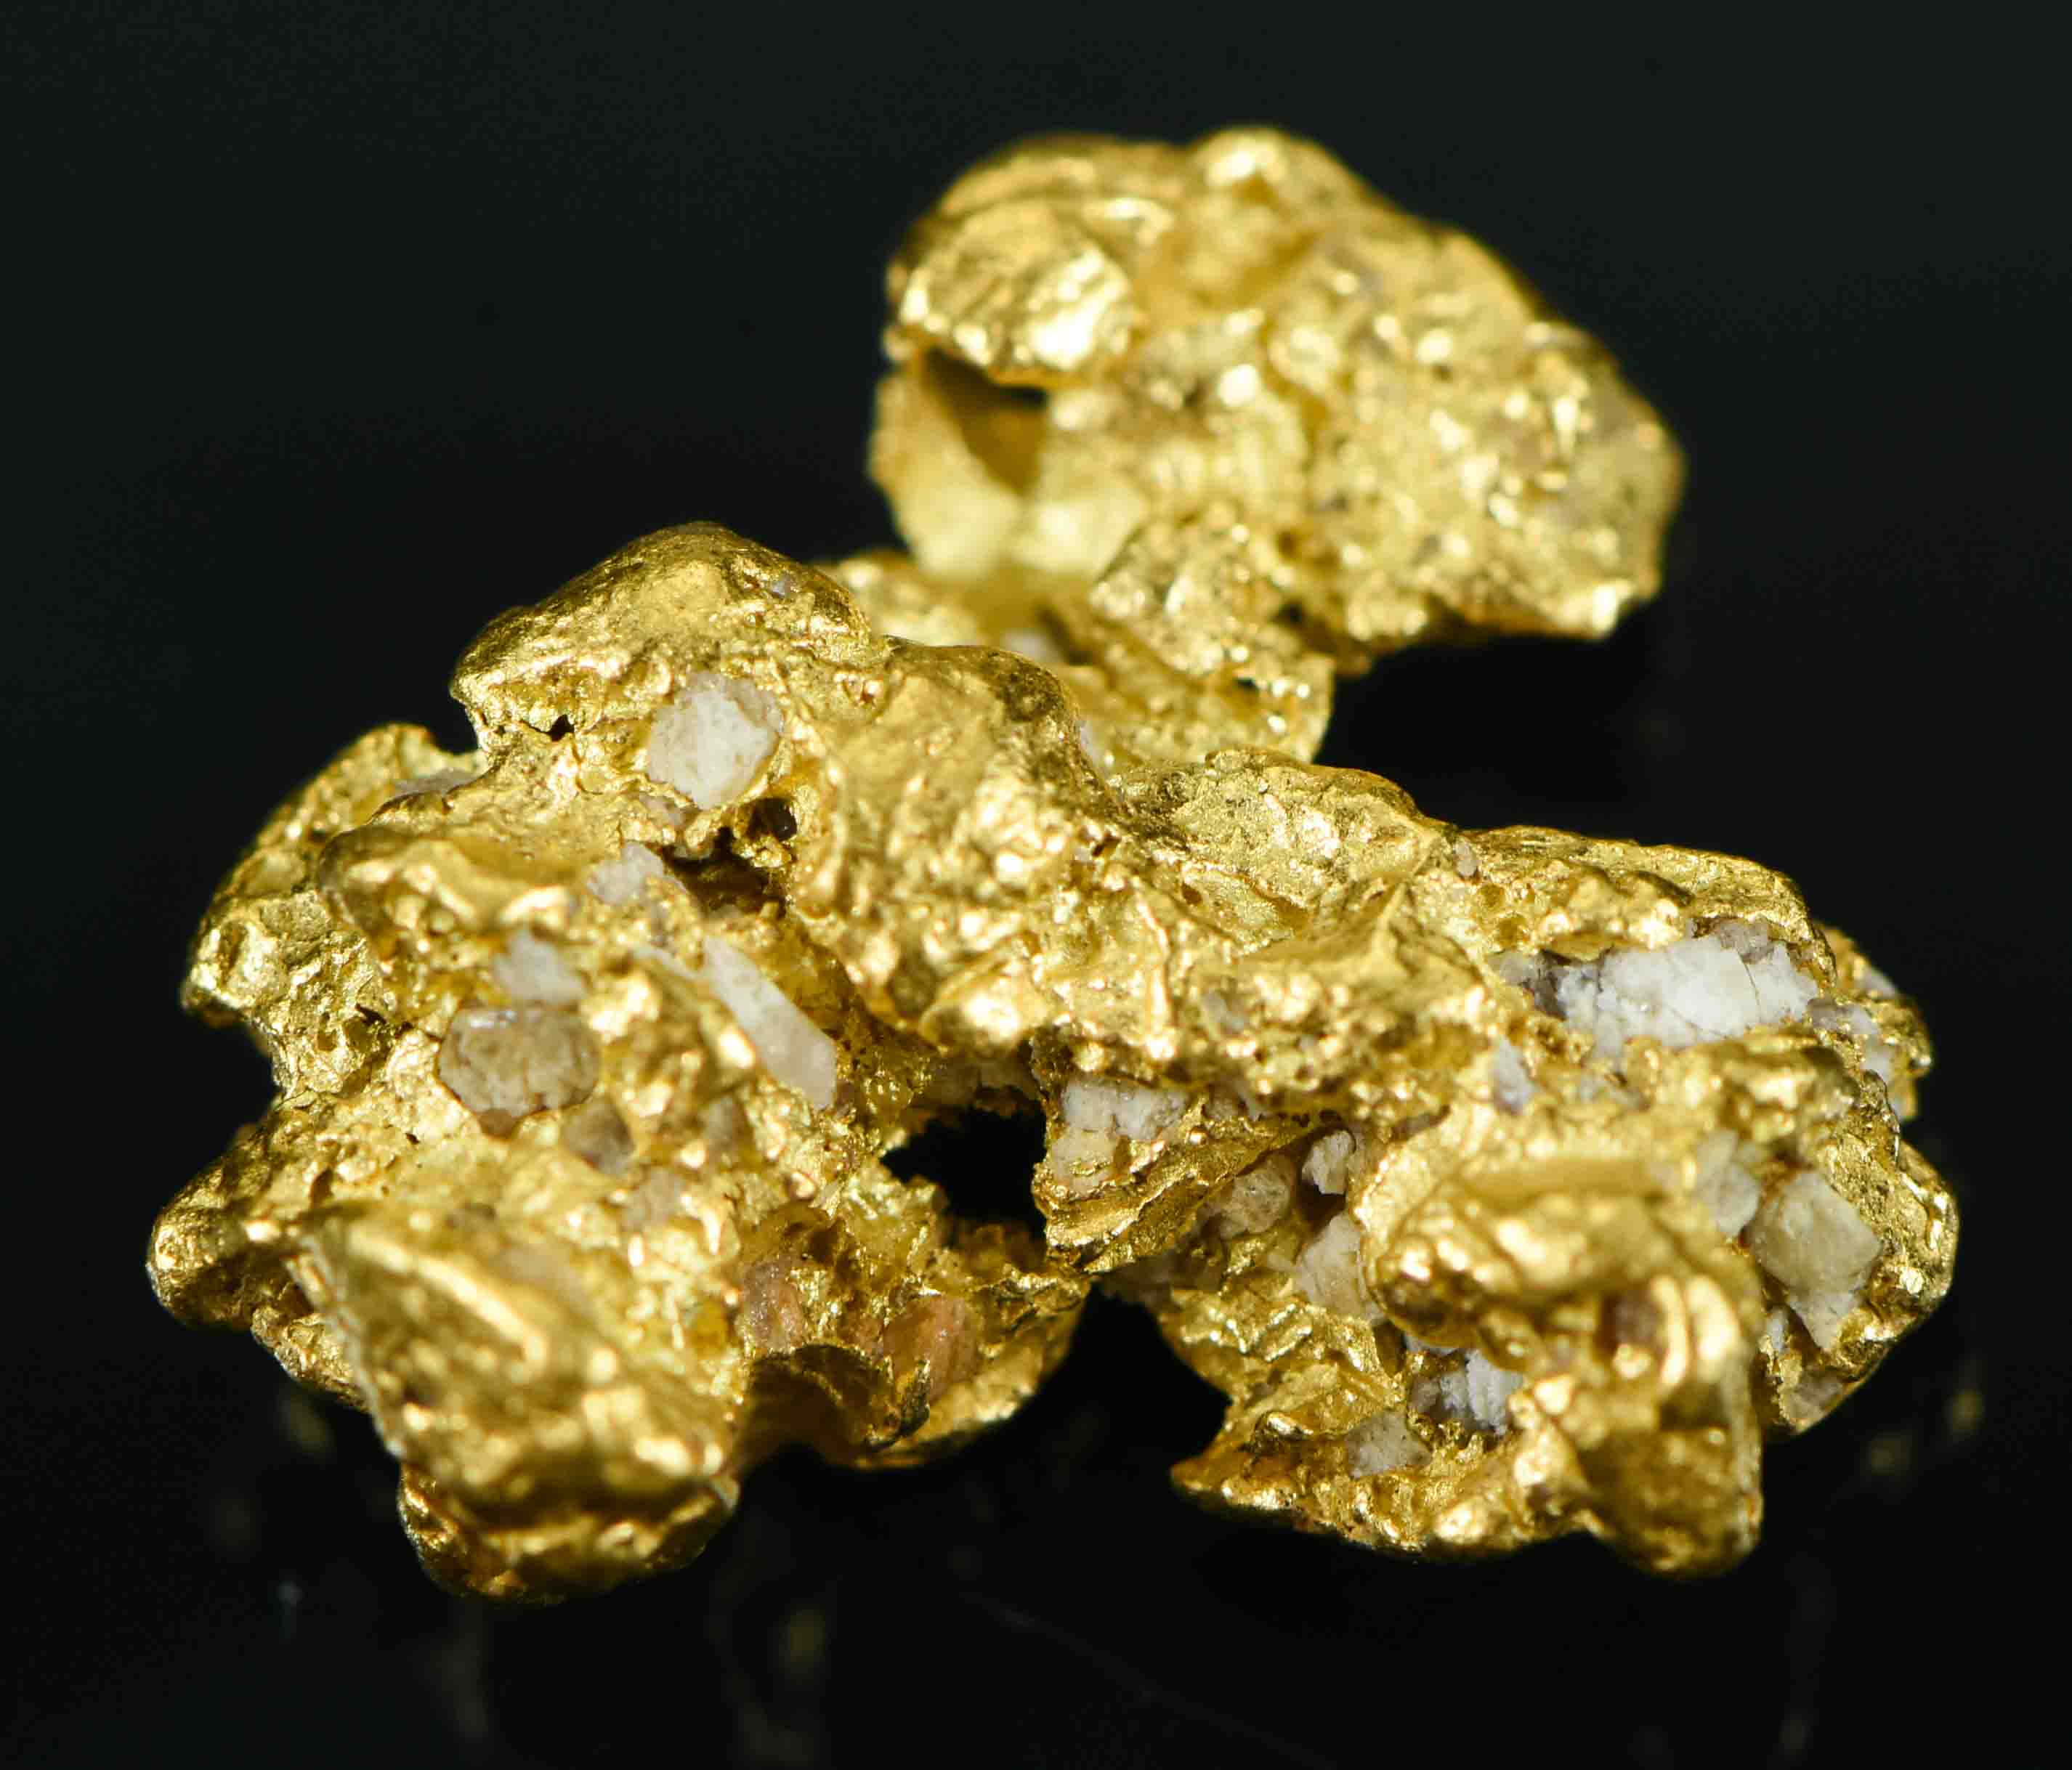 #24 Australian Natural Gold Nugget With Quartz Weighs 2.19 Grams.